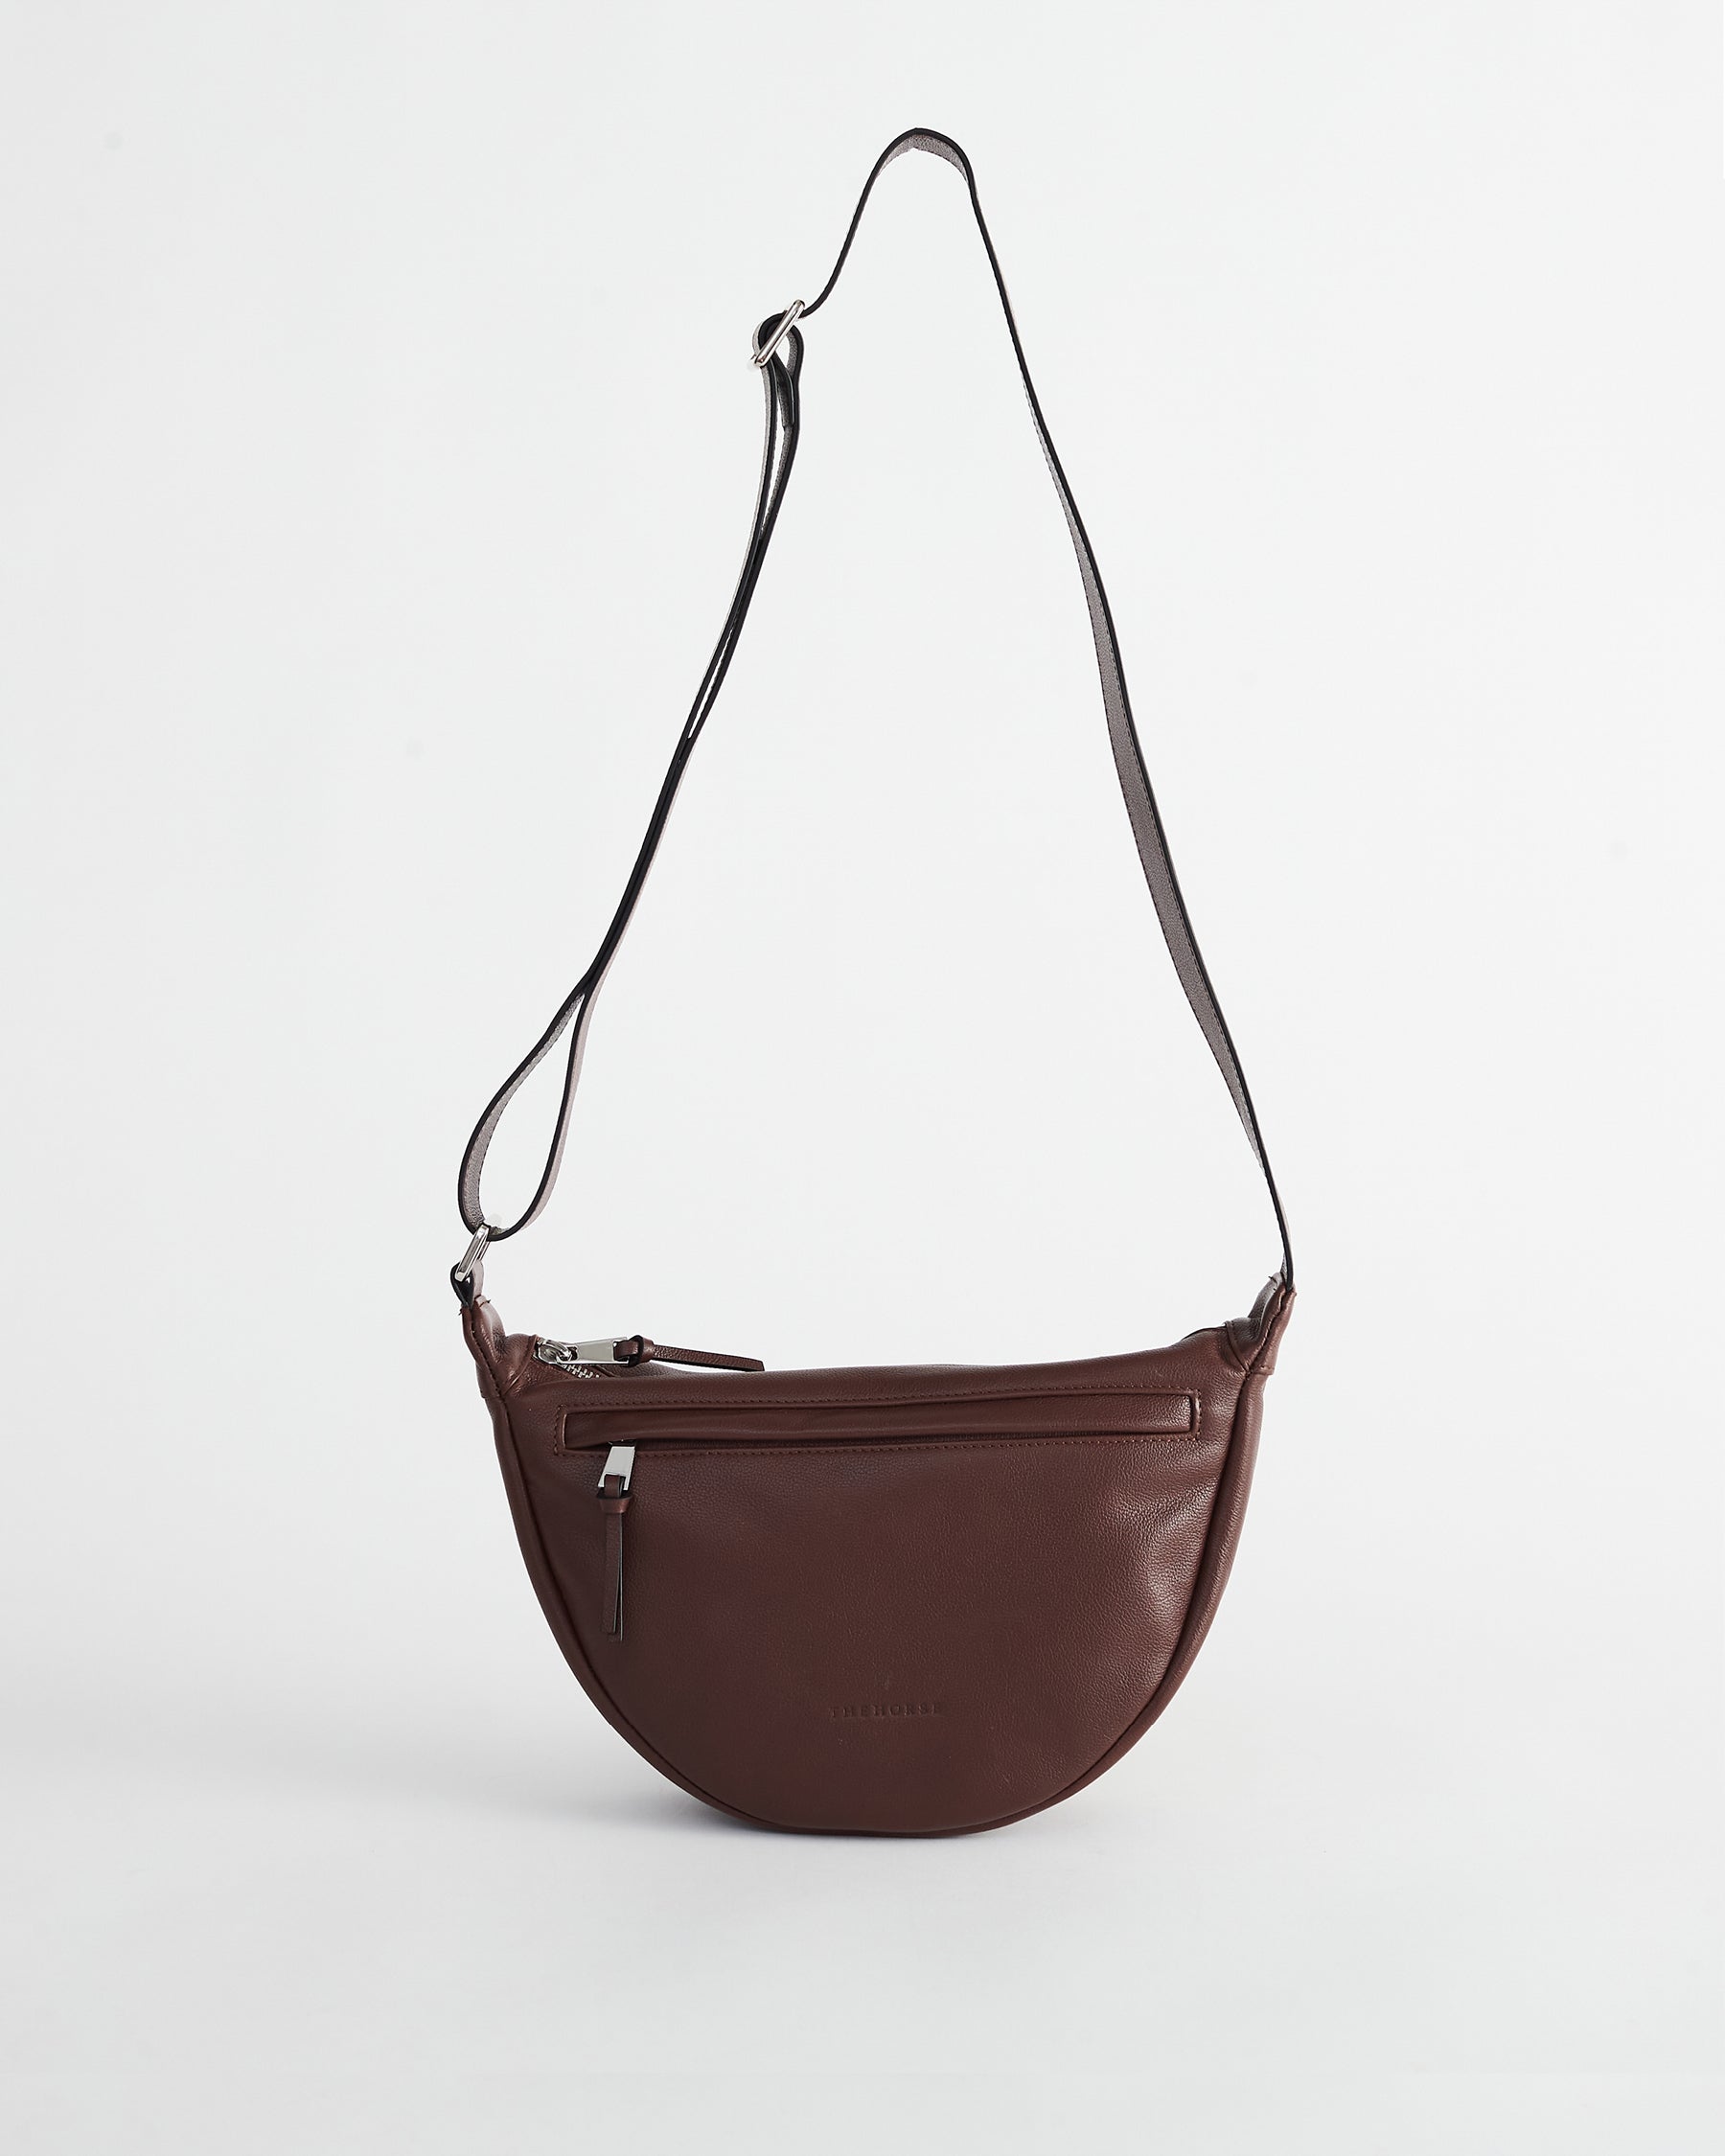 The Sporty Leather Crossbody Bag in Coffee by The Horse®